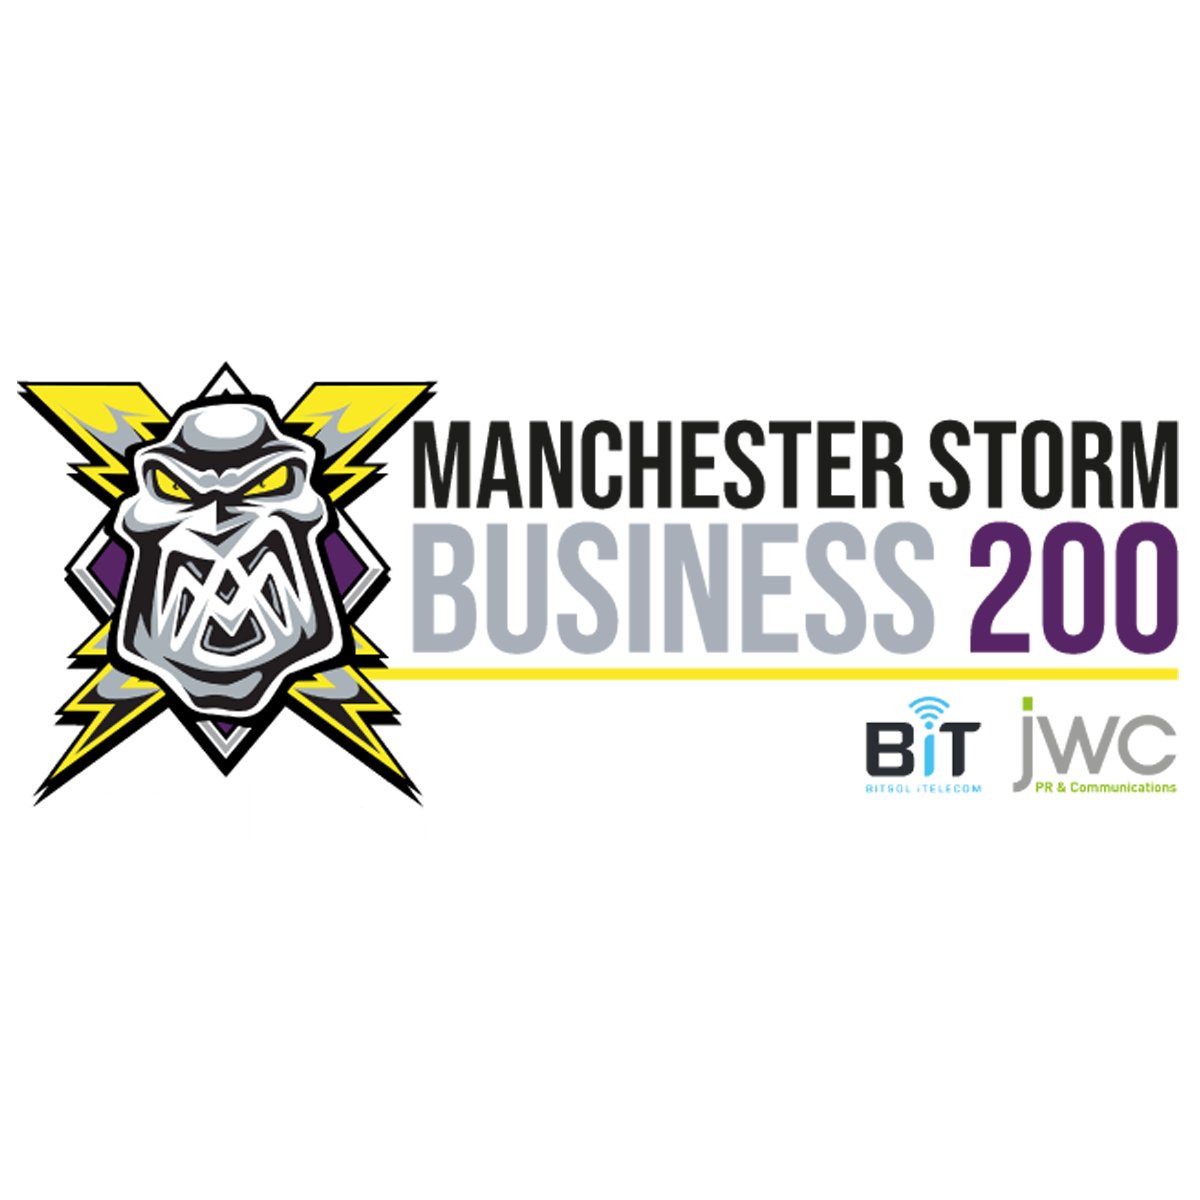 Monthly business networking in Manchester and Altrincham. official business club of the @Mcr_Storm